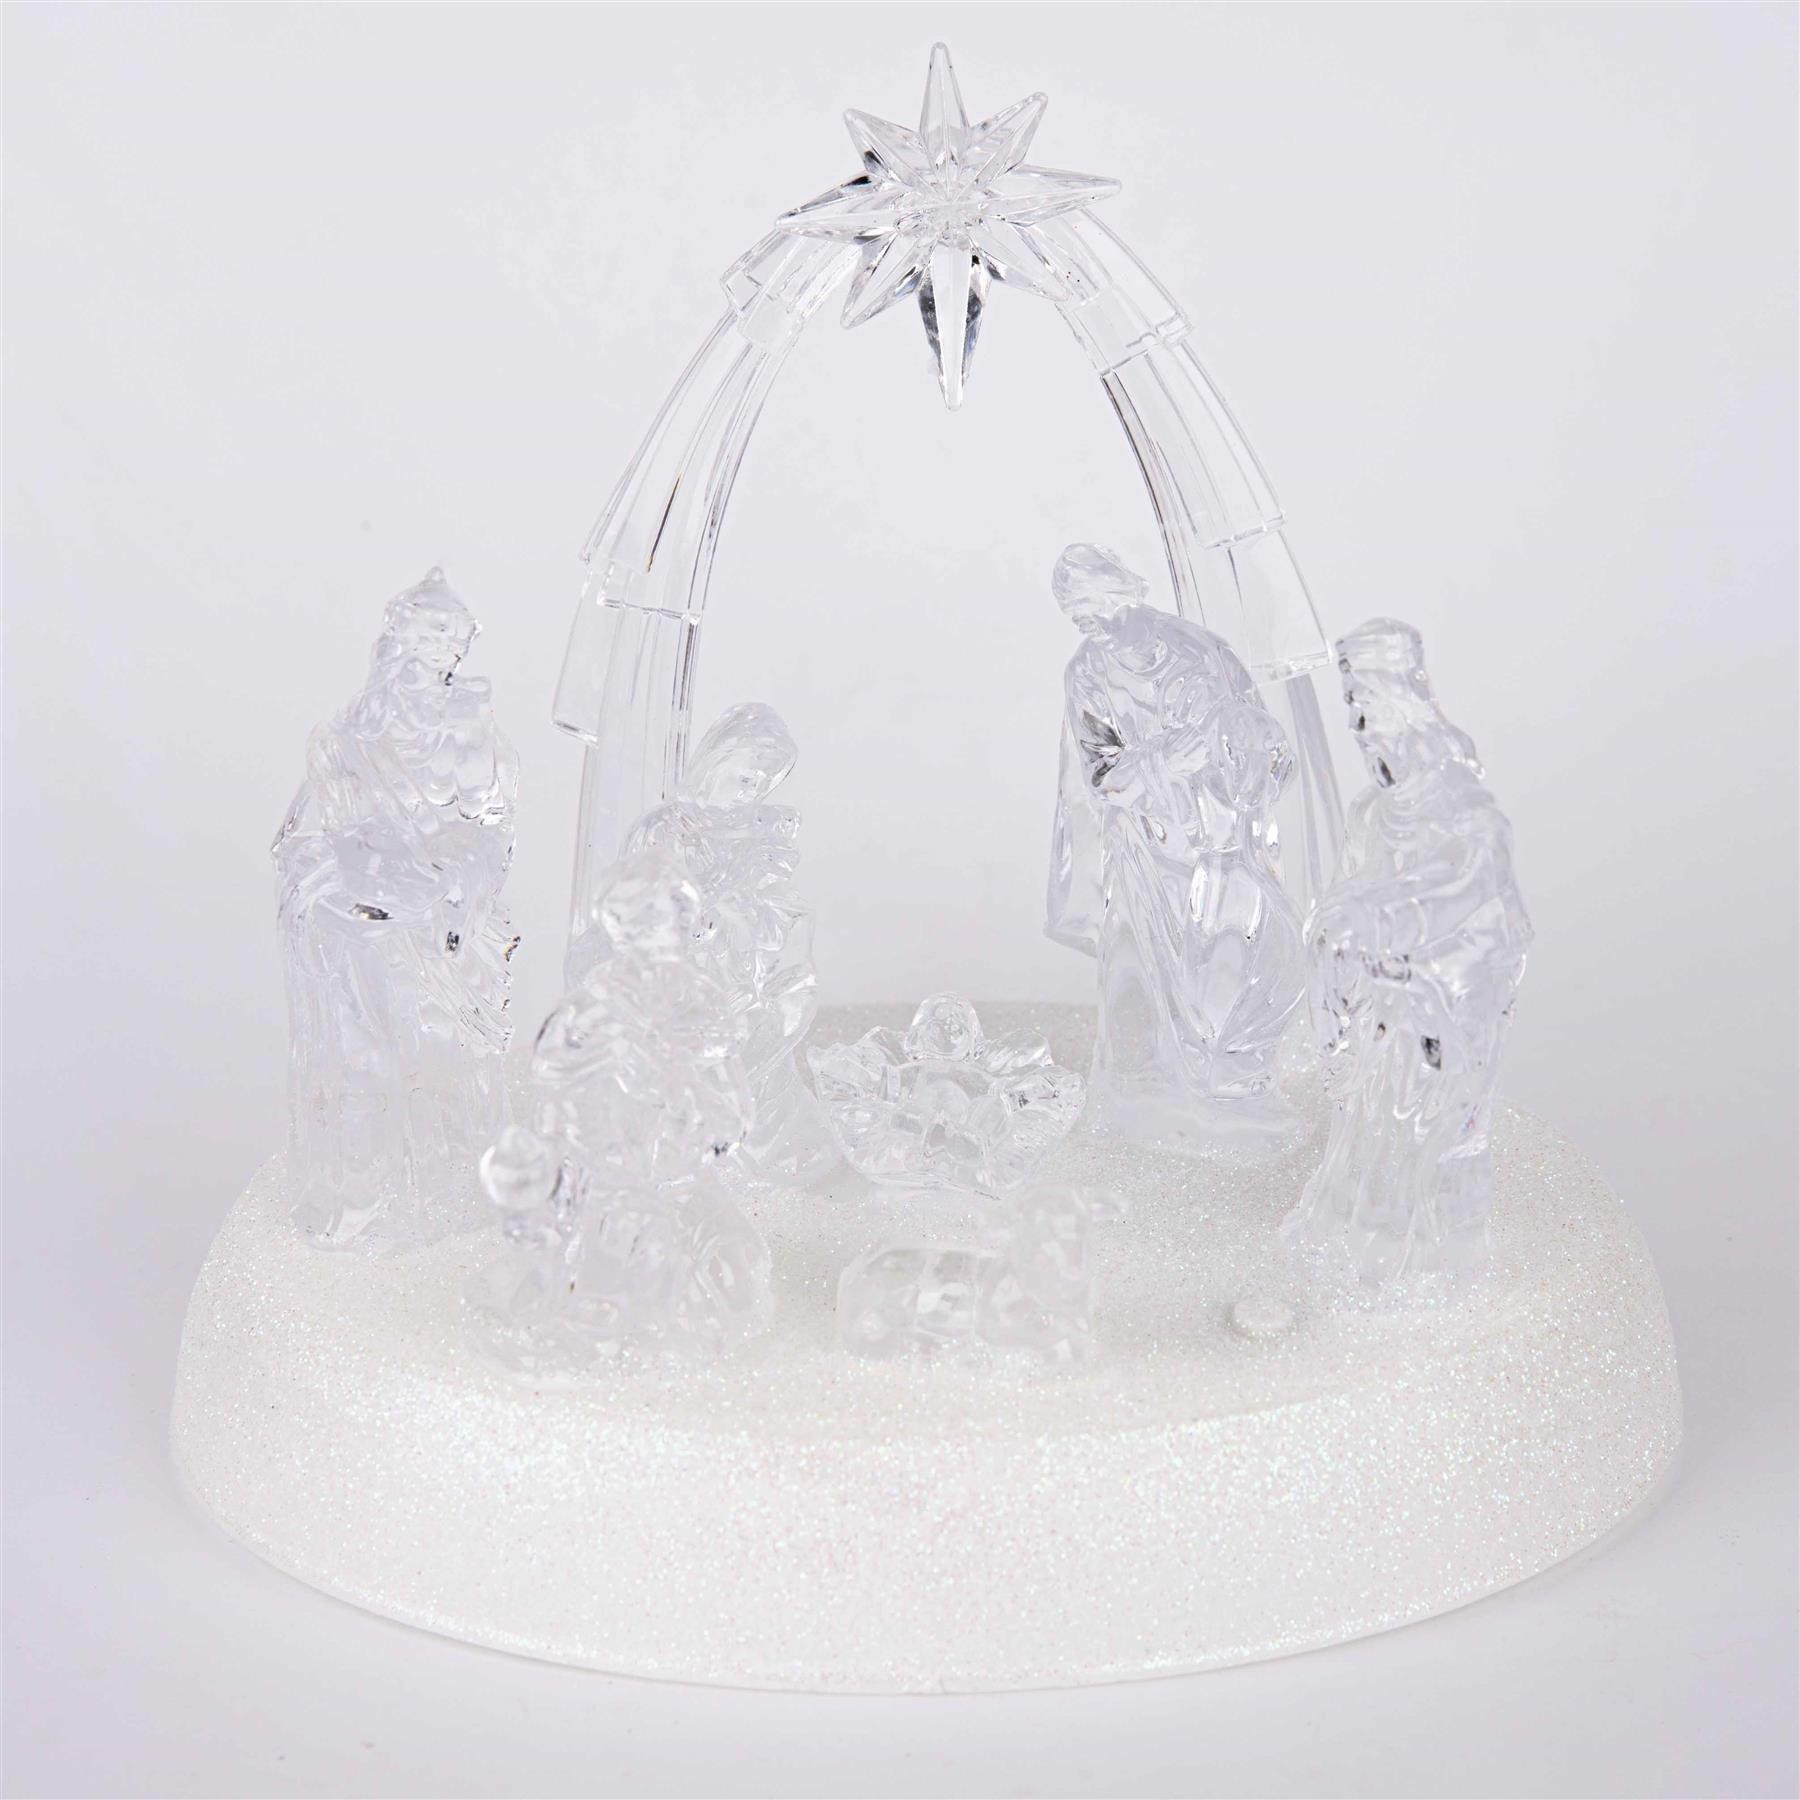 20cm Christmas Pre-Lit LED Musical Nativity Scene Acrylic Sculpture Battery Operated Light Up Xmas Tabletop Home Decorations - image 1